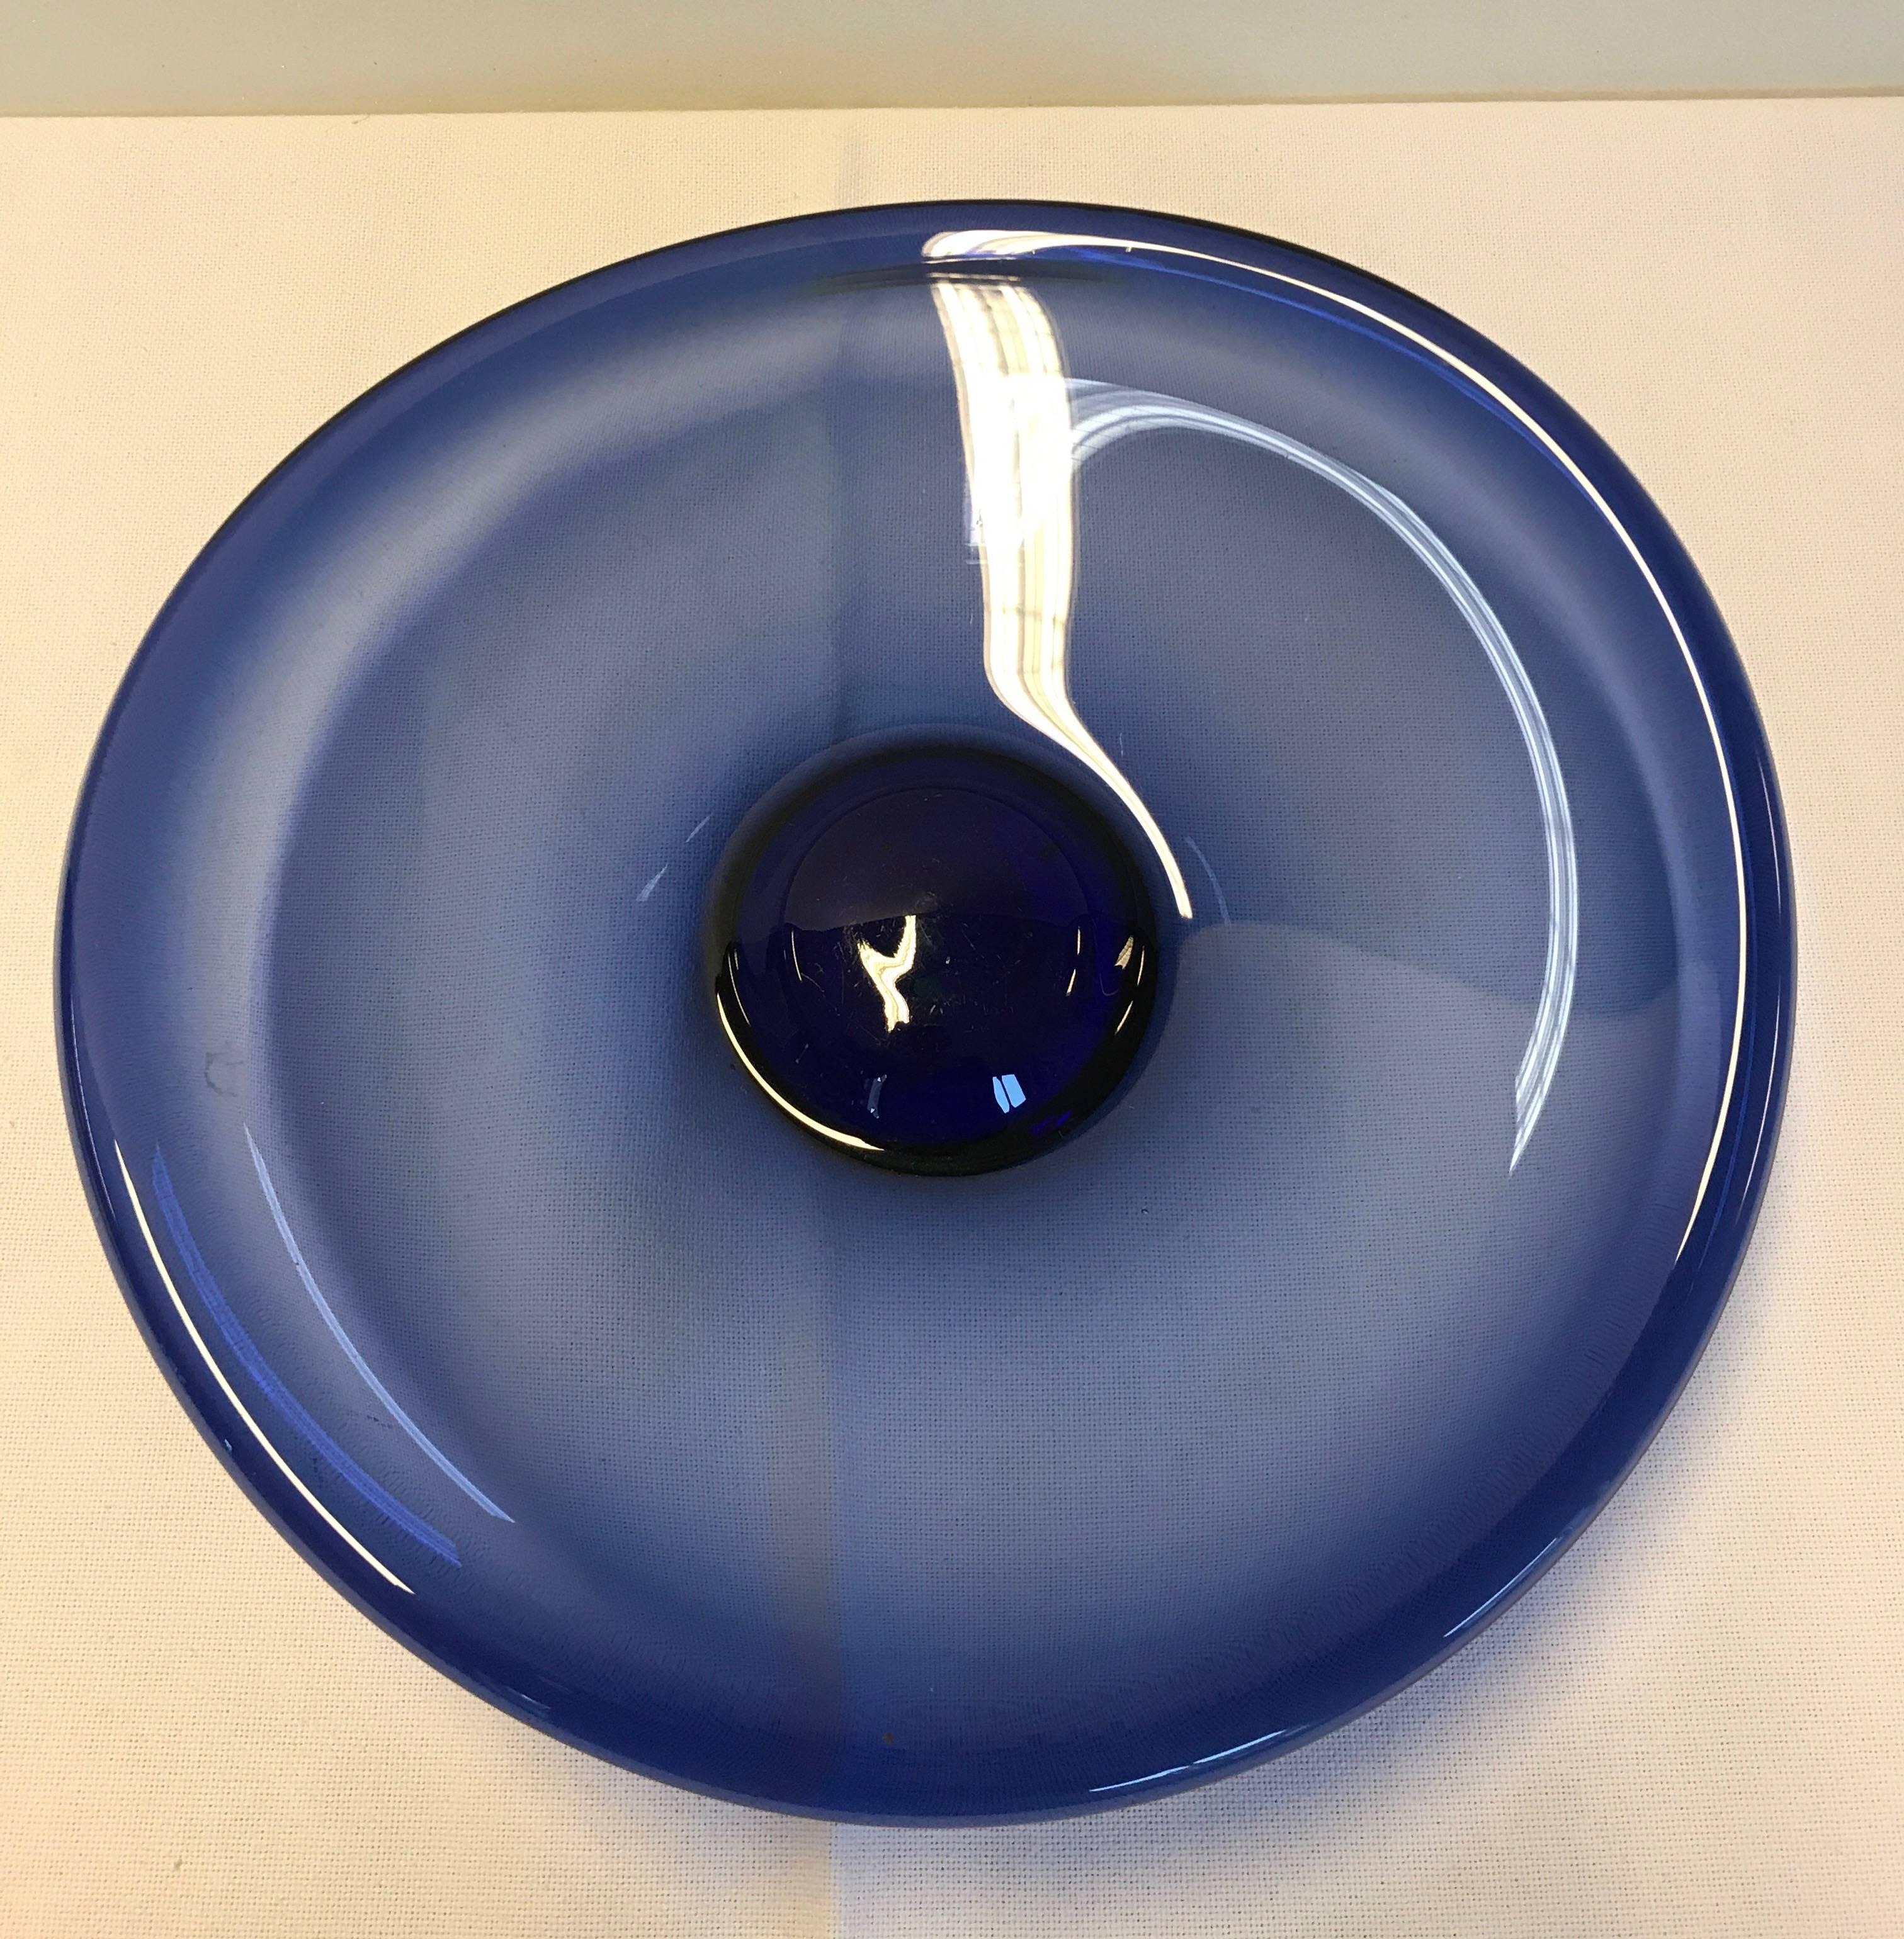 Holmegaard blue glass dish/bowl. By Per Lutken, 1950s, Denmark. Diameter 27 cm, height 6 cm in good condition with very few marks of normal use.